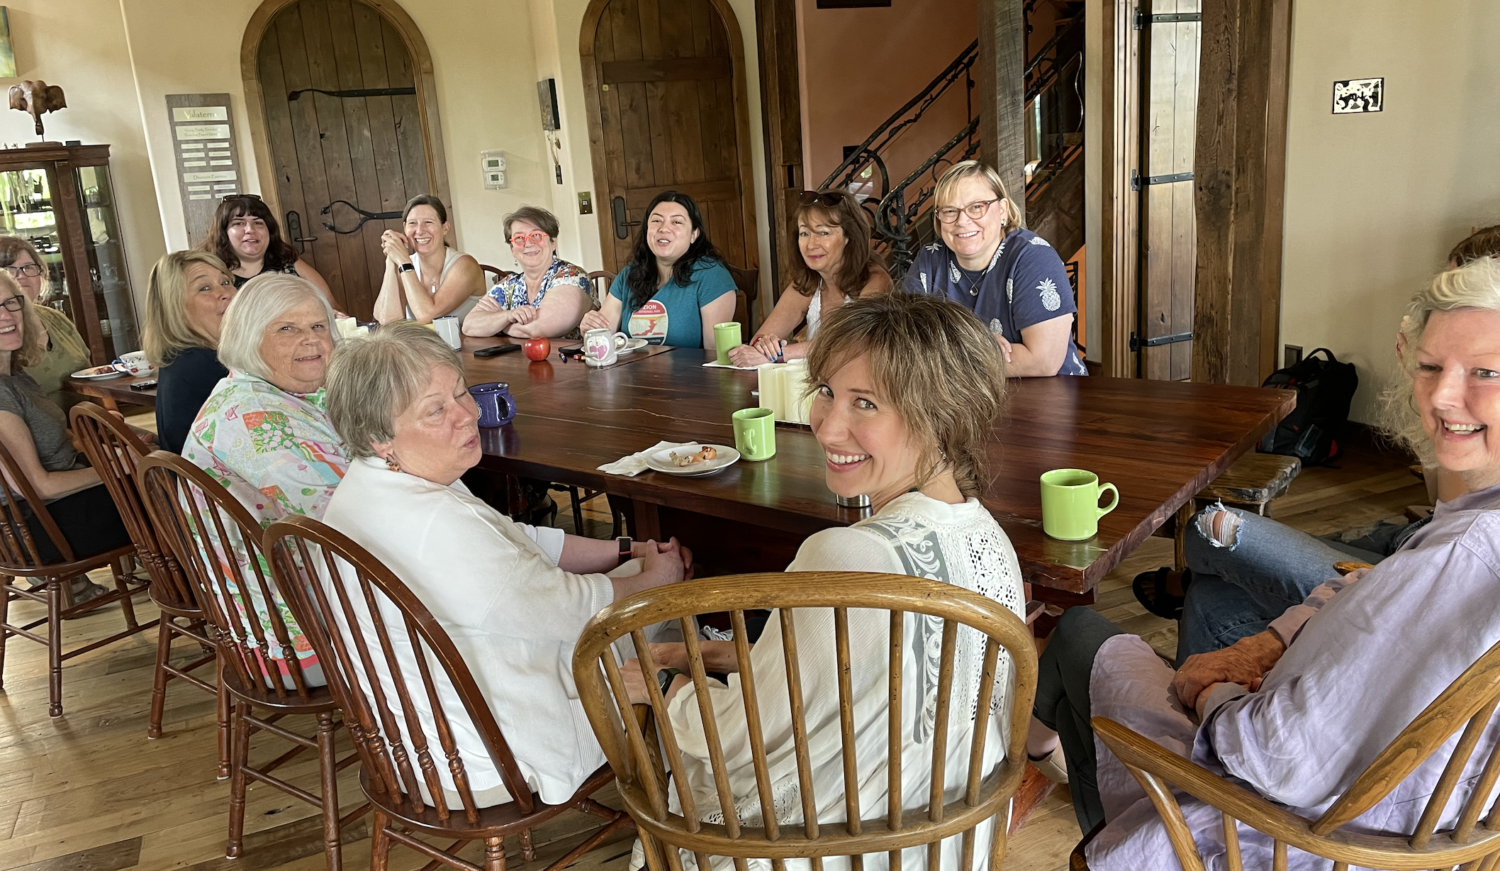 Photo was taken by Kimberly Crum at our June 3, 2023, Valaterra day retreat.